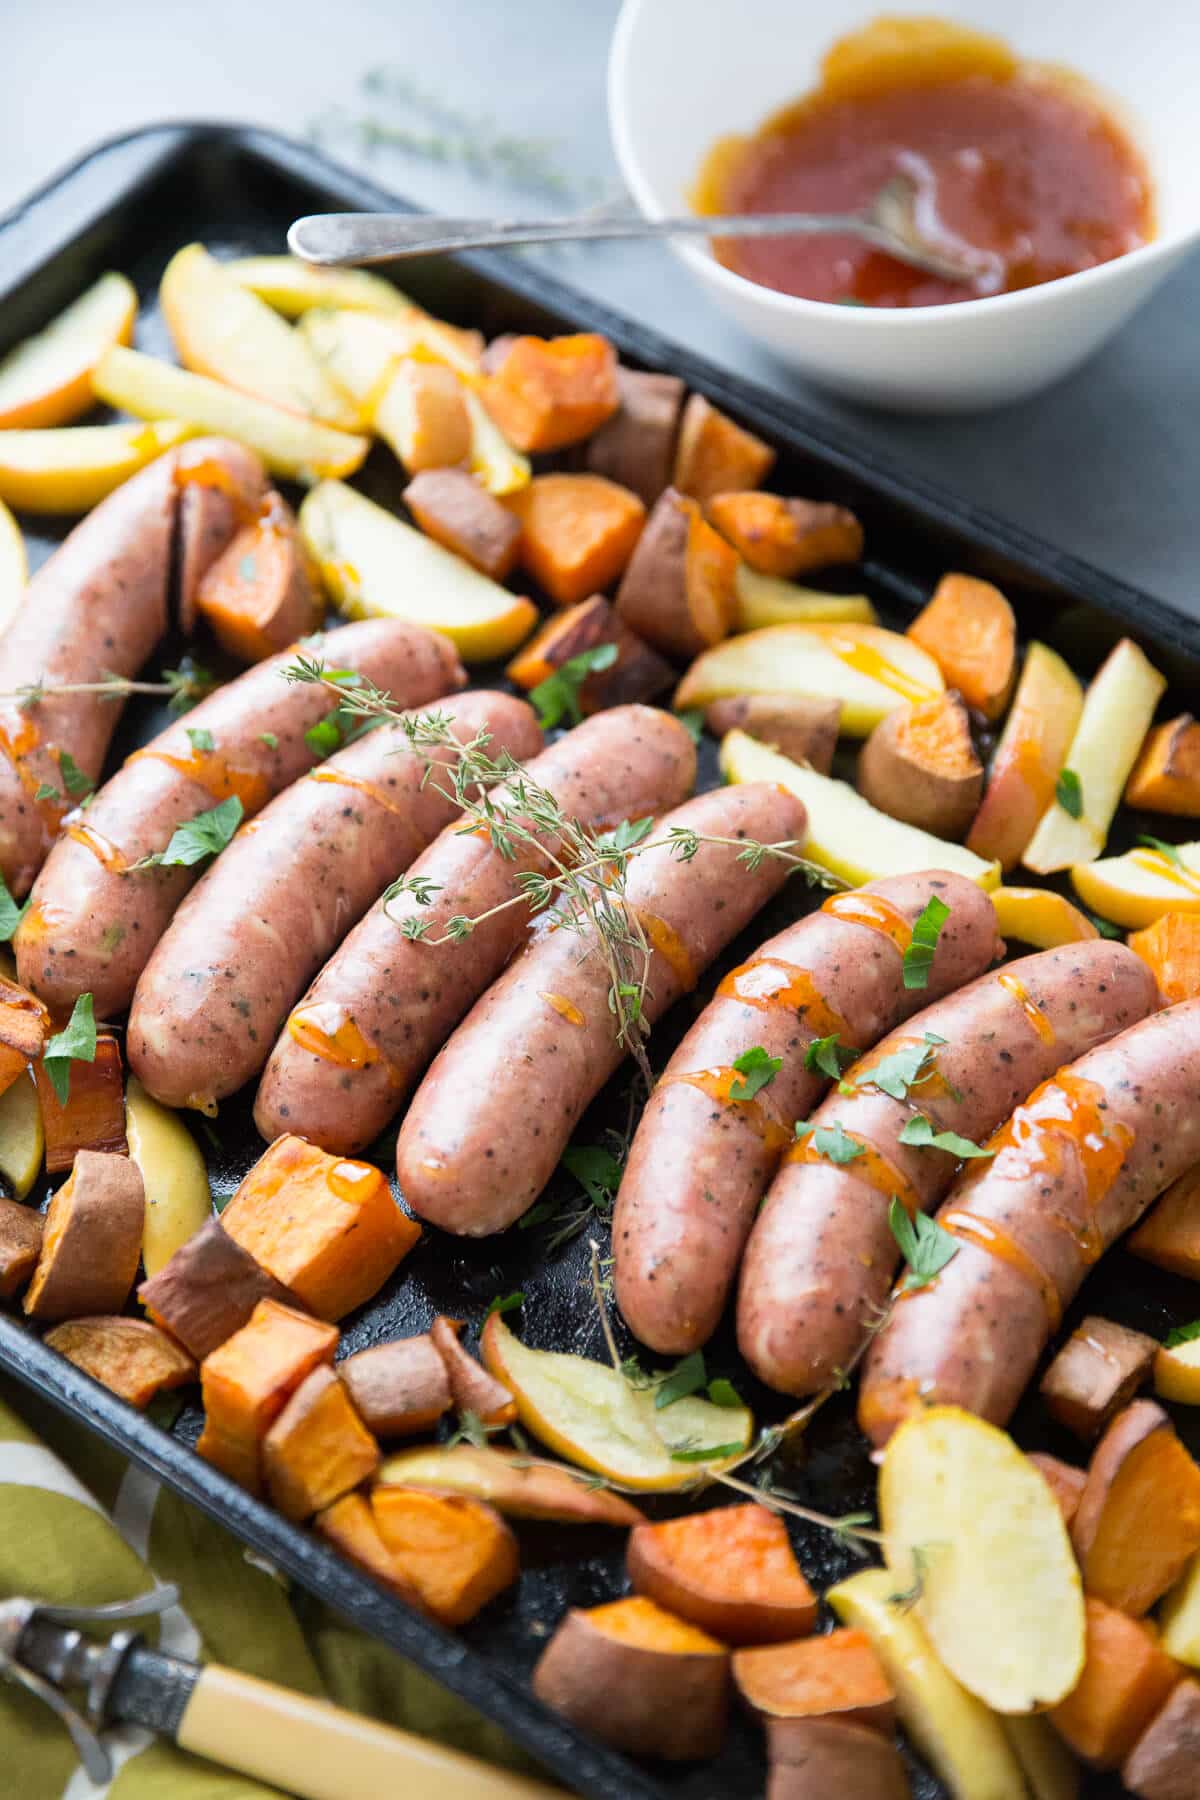 This sheet pan sausage dinner is inspired by the flavors of fall.  Cheesy sausage is baked along side sweet potatoes, apples and a simple apricot glaze!